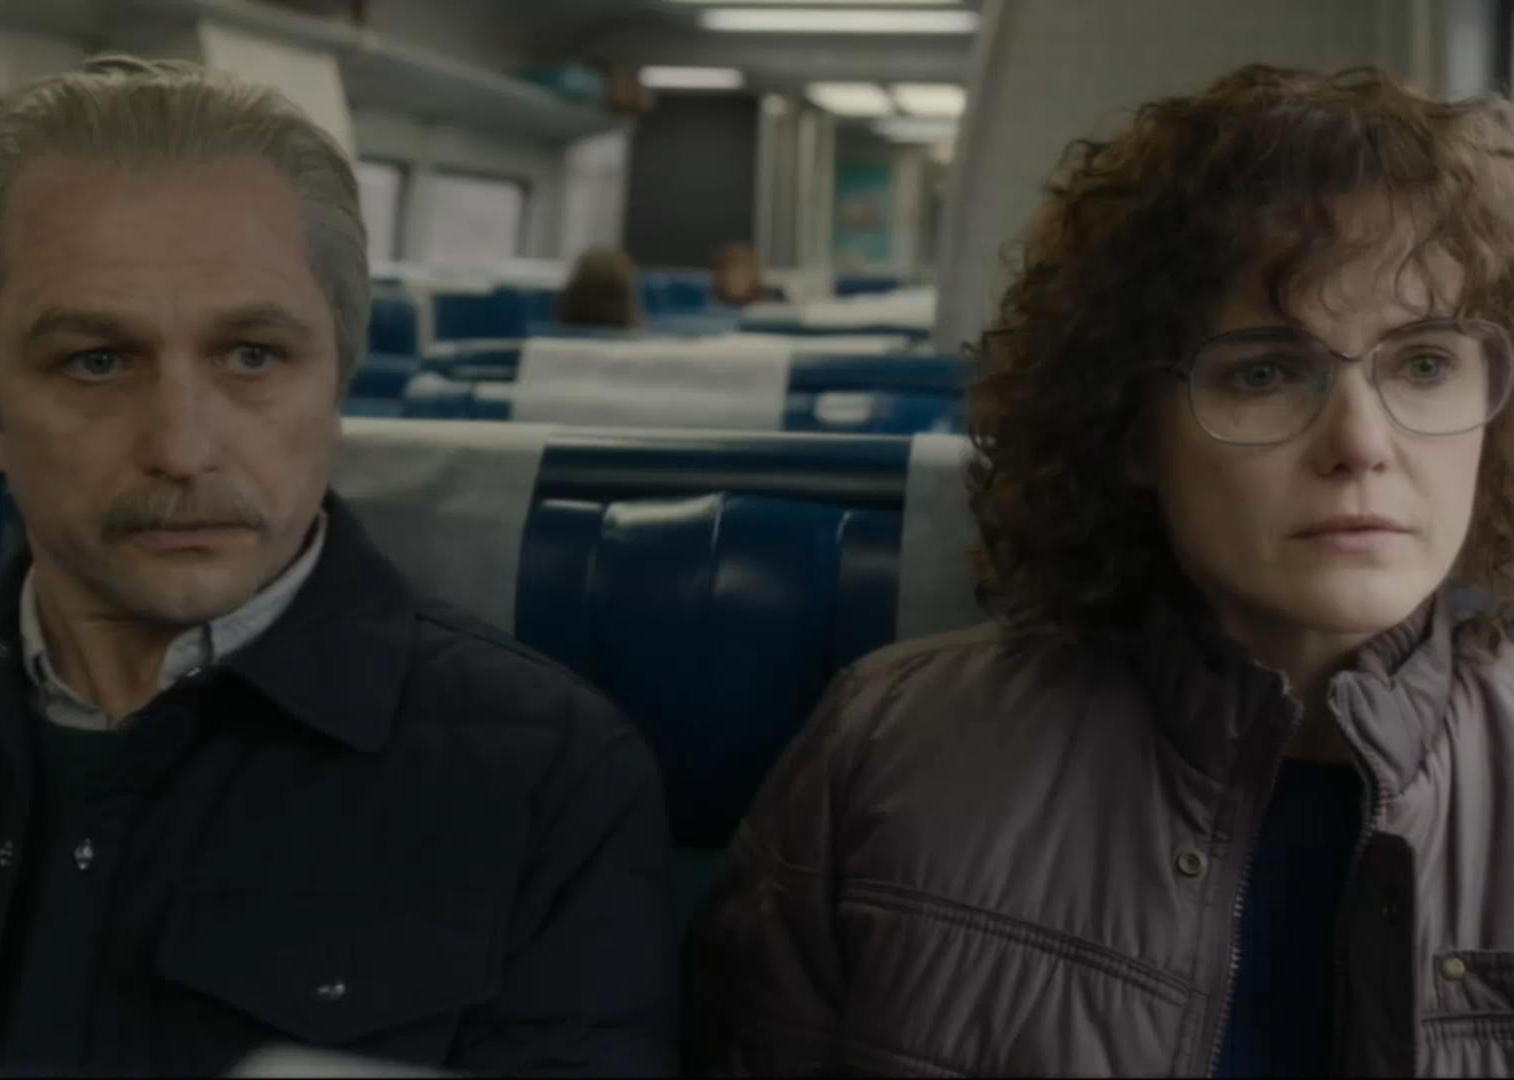 Keri Russell and Matthew Rhys on a train together.